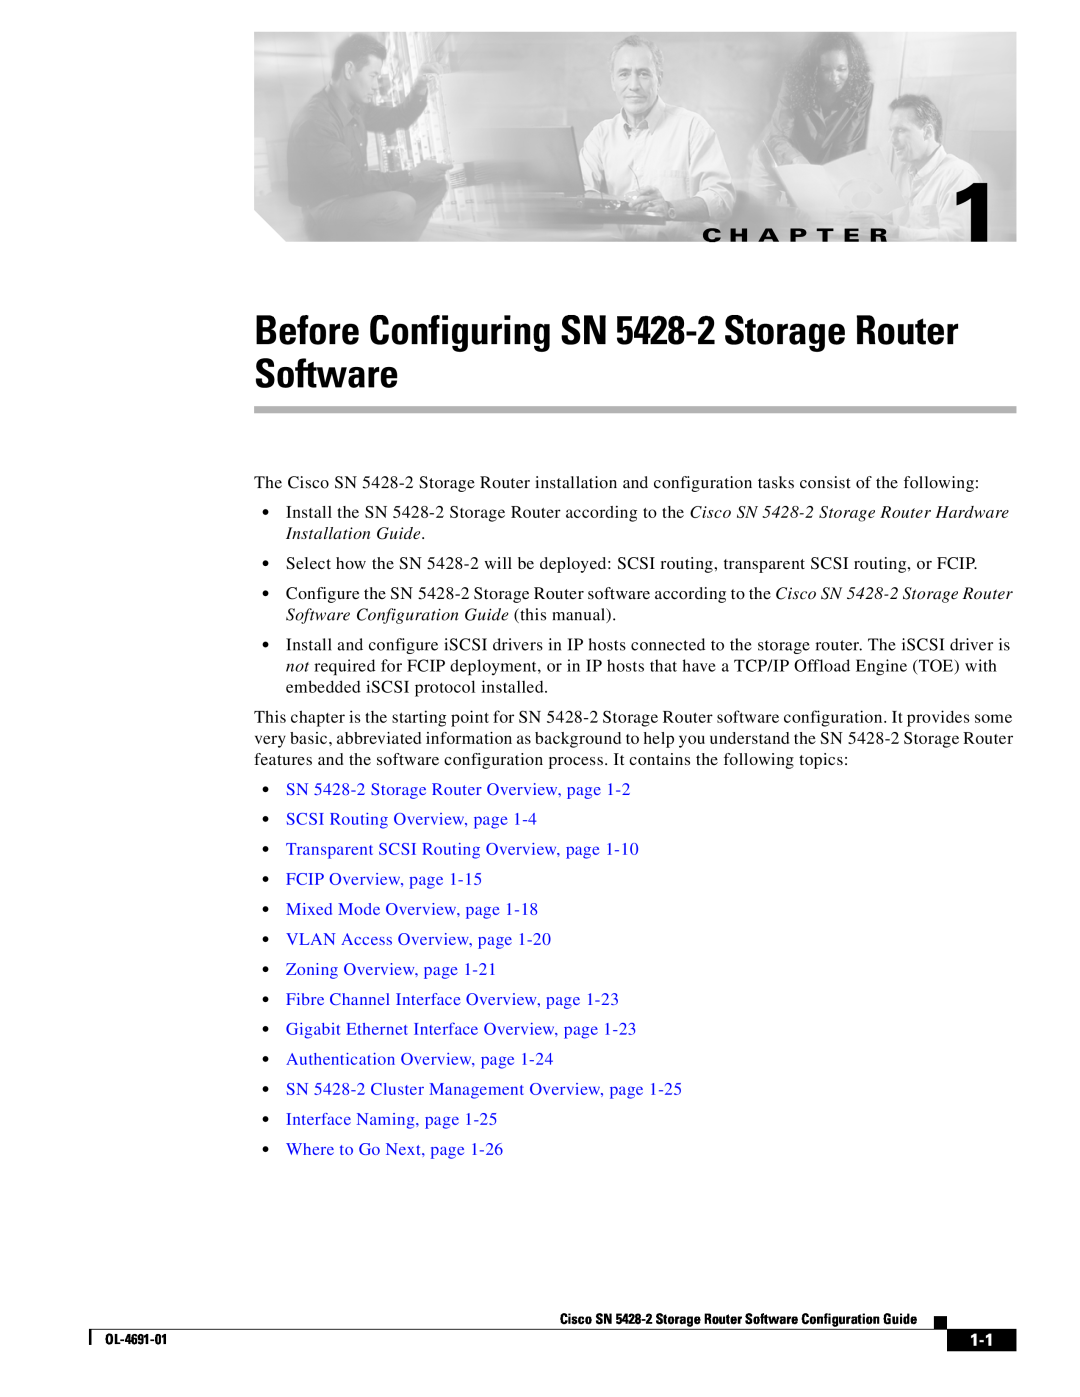 Cisco Systems manual SN 5428-2 Storage Router Overview, page SCSI Routing Overview, page, Authentication Overview, page 